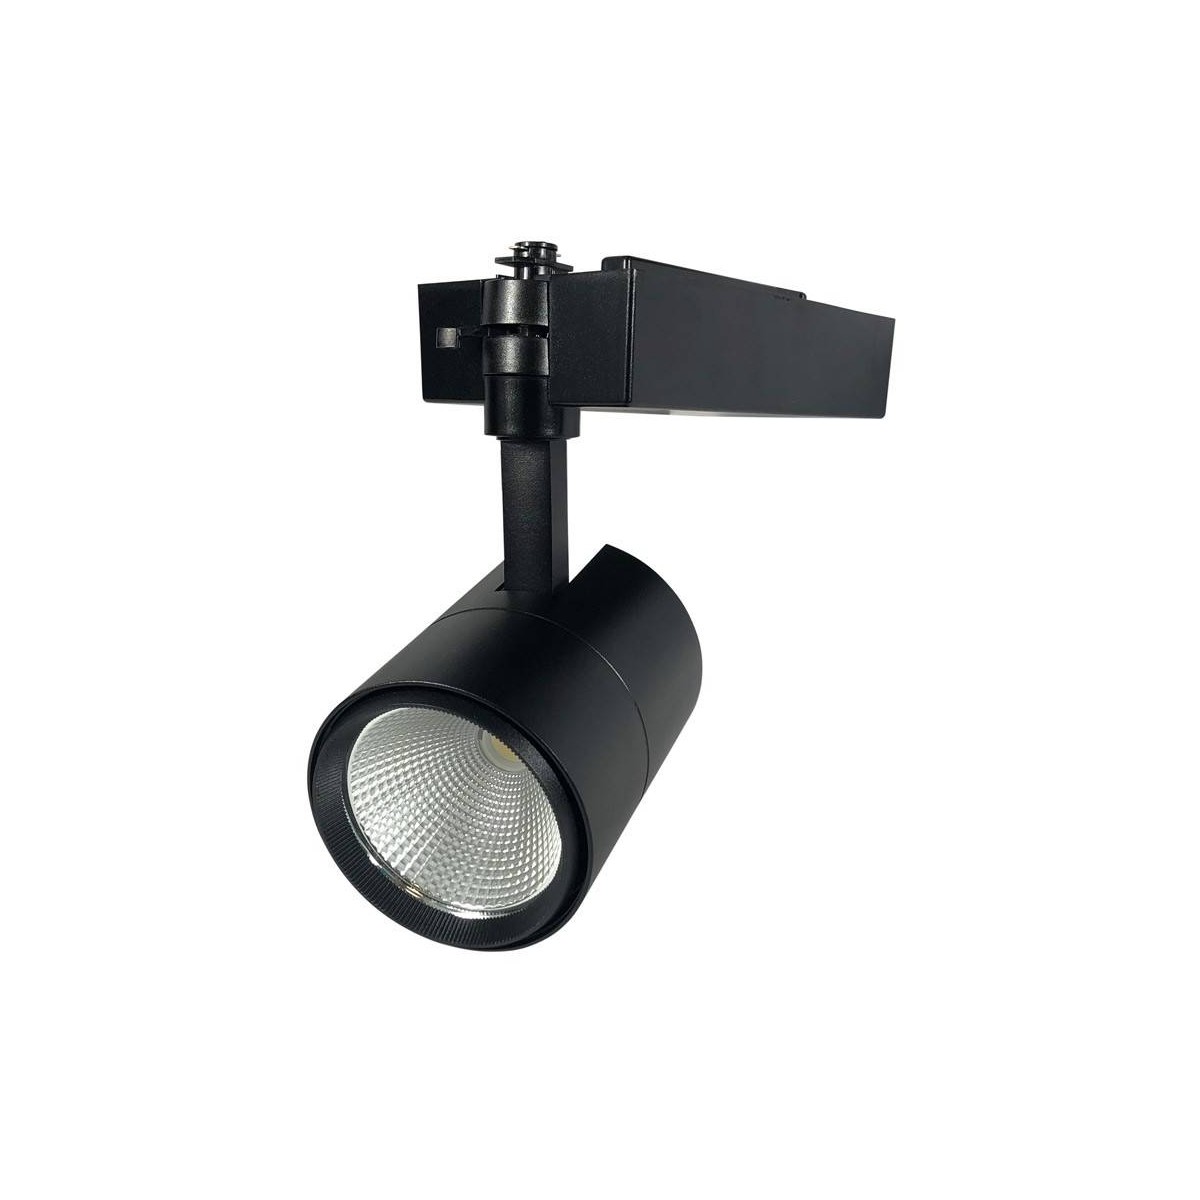 1-phase track LED spotlight special for fishmongers - Philips Driver- COB LED - 40W